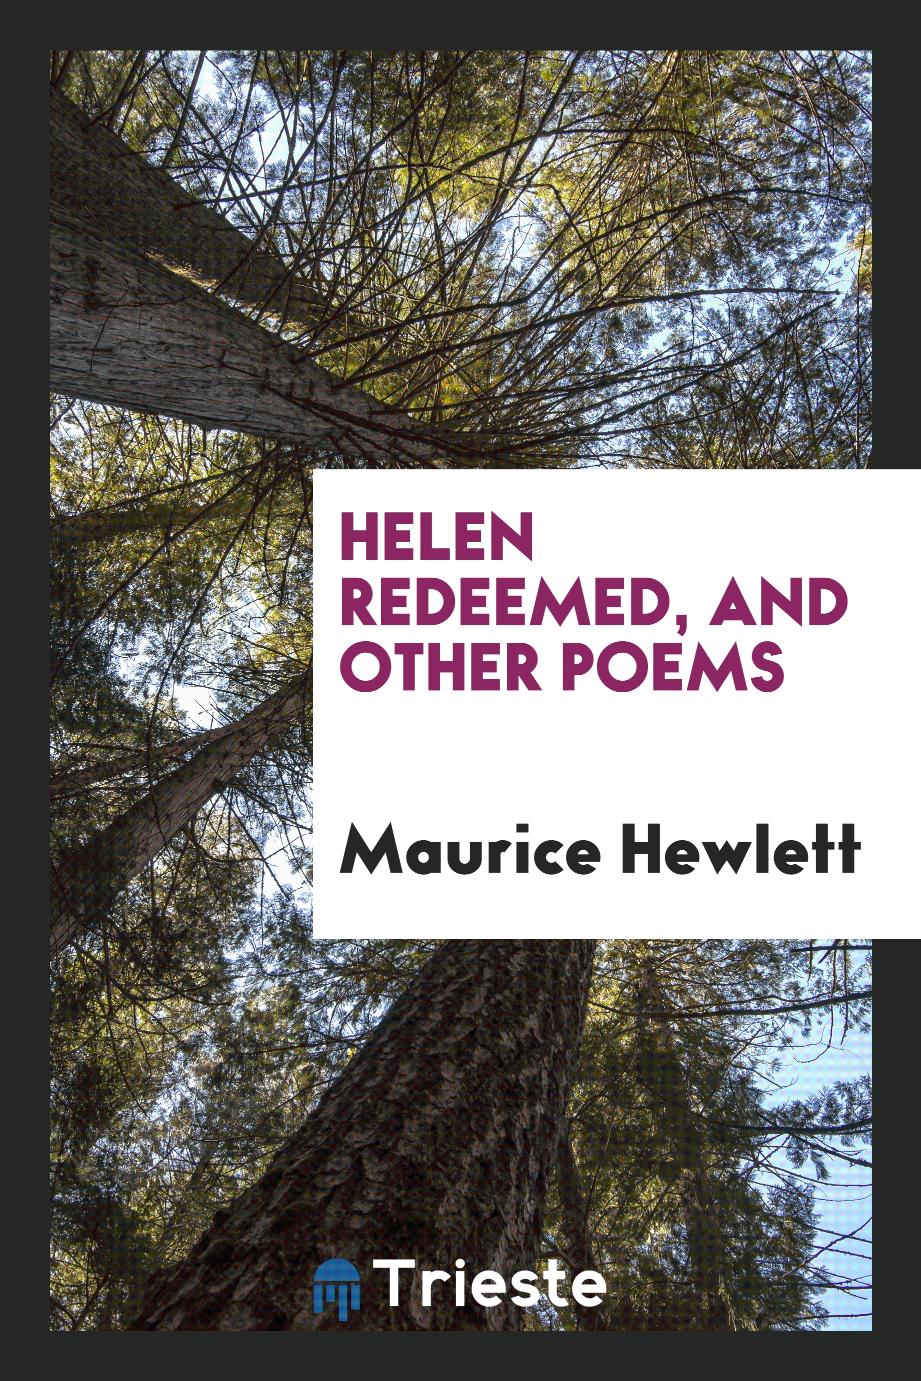 Helen redeemed, and other poems